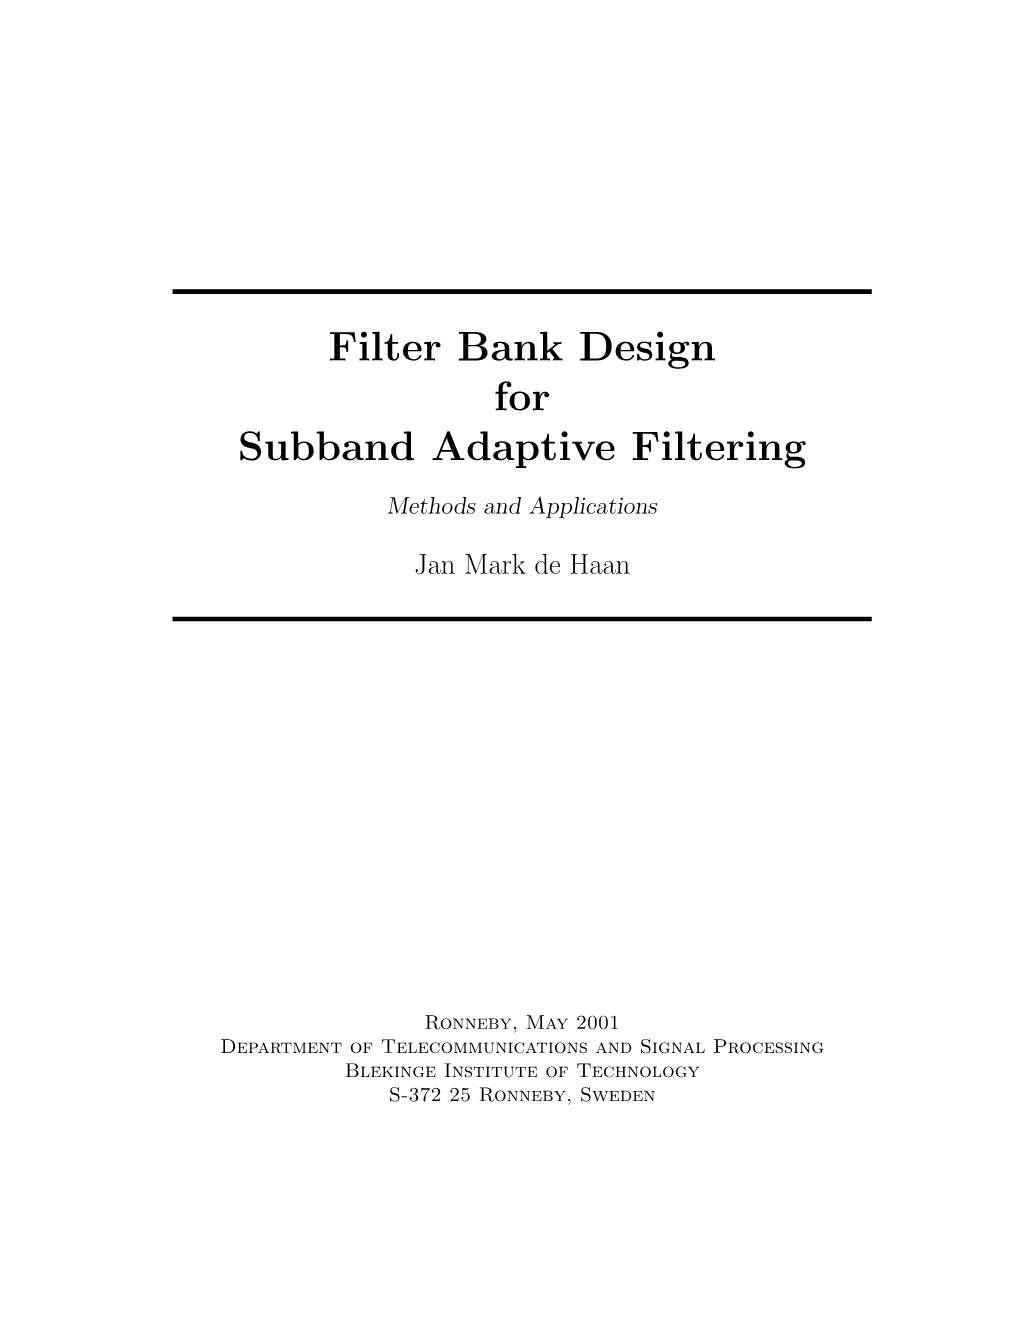 Filter Bank Design for Subband Adaptive Filtering Methods and Applications